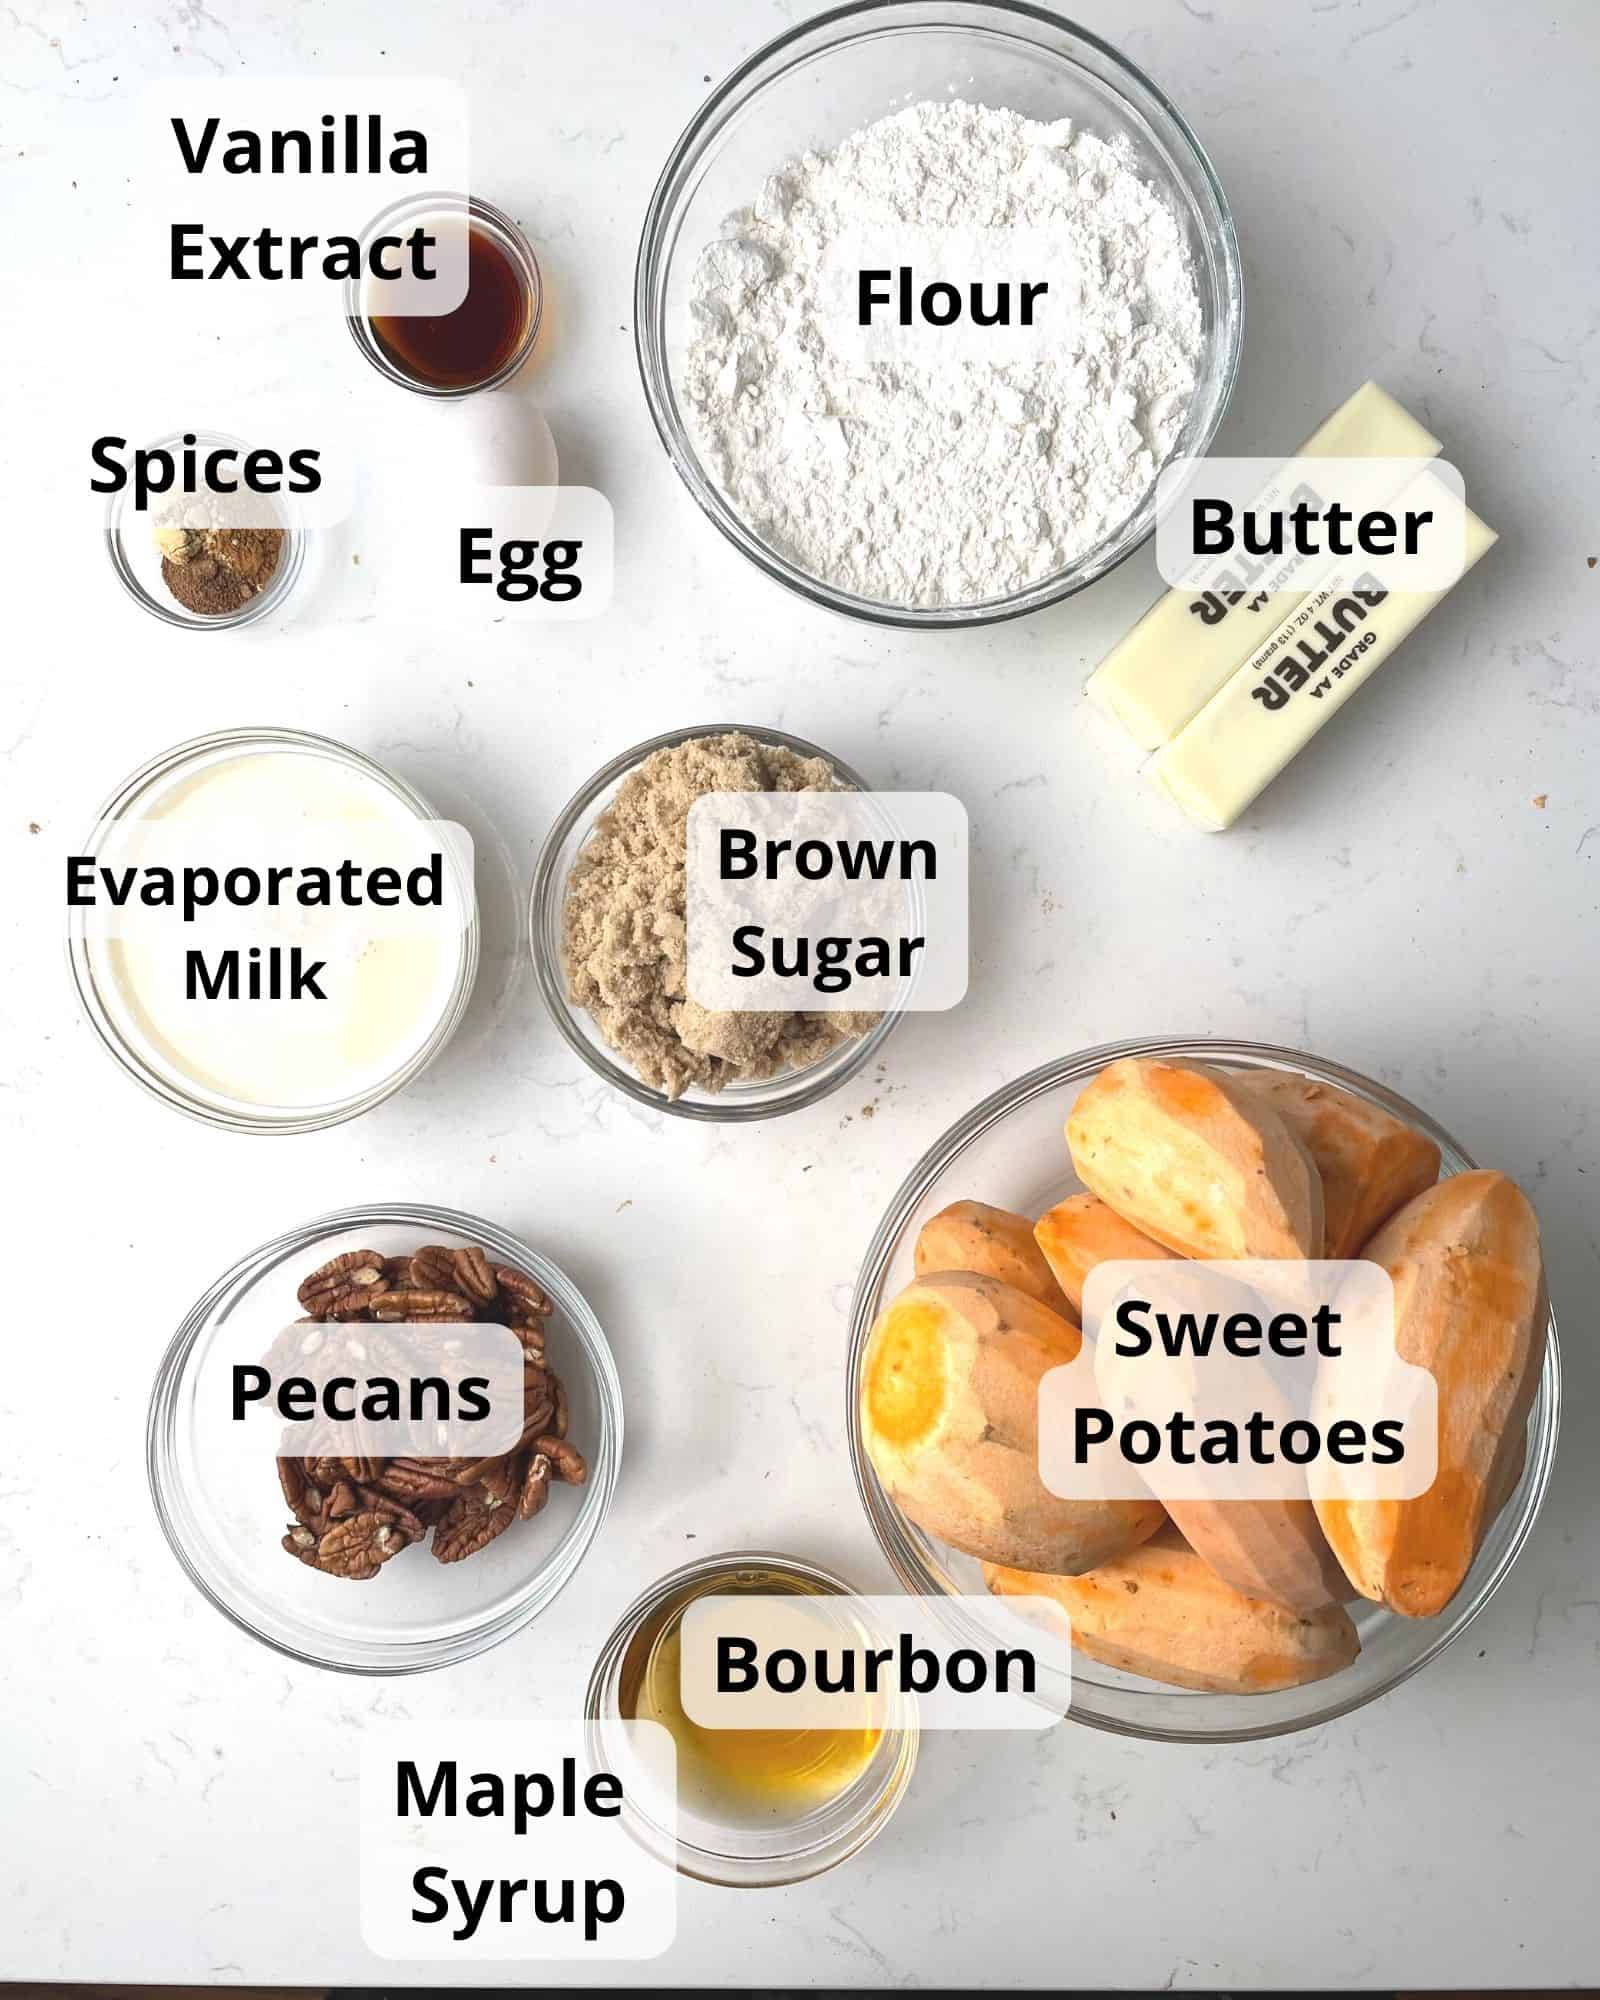 ingredients to make bourbon sweet potato casserole - butter, pecans, brown sugar flour, cinnamon, nutmeg, sweet potatoes, ginger, bourbon, maple syrup, evaporated milk, vanilla extract, and an egg.